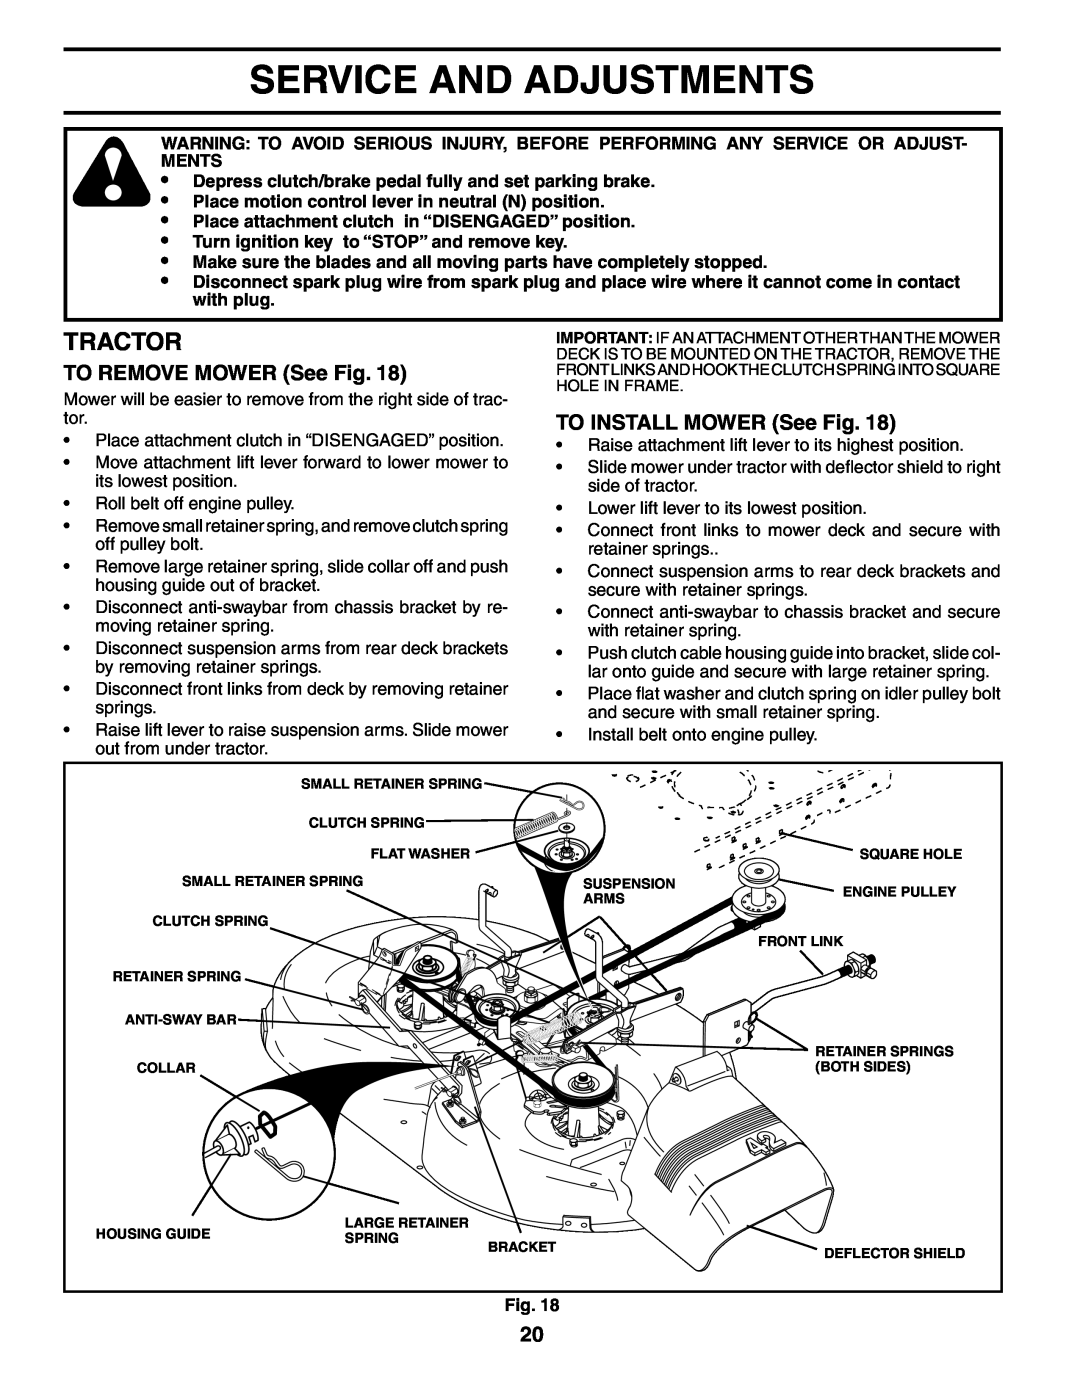 Poulan 184617 owner manual Service And Adjustments, TO REMOVE MOWER See Fig, TO INSTALL MOWER See Fig, Tractor 